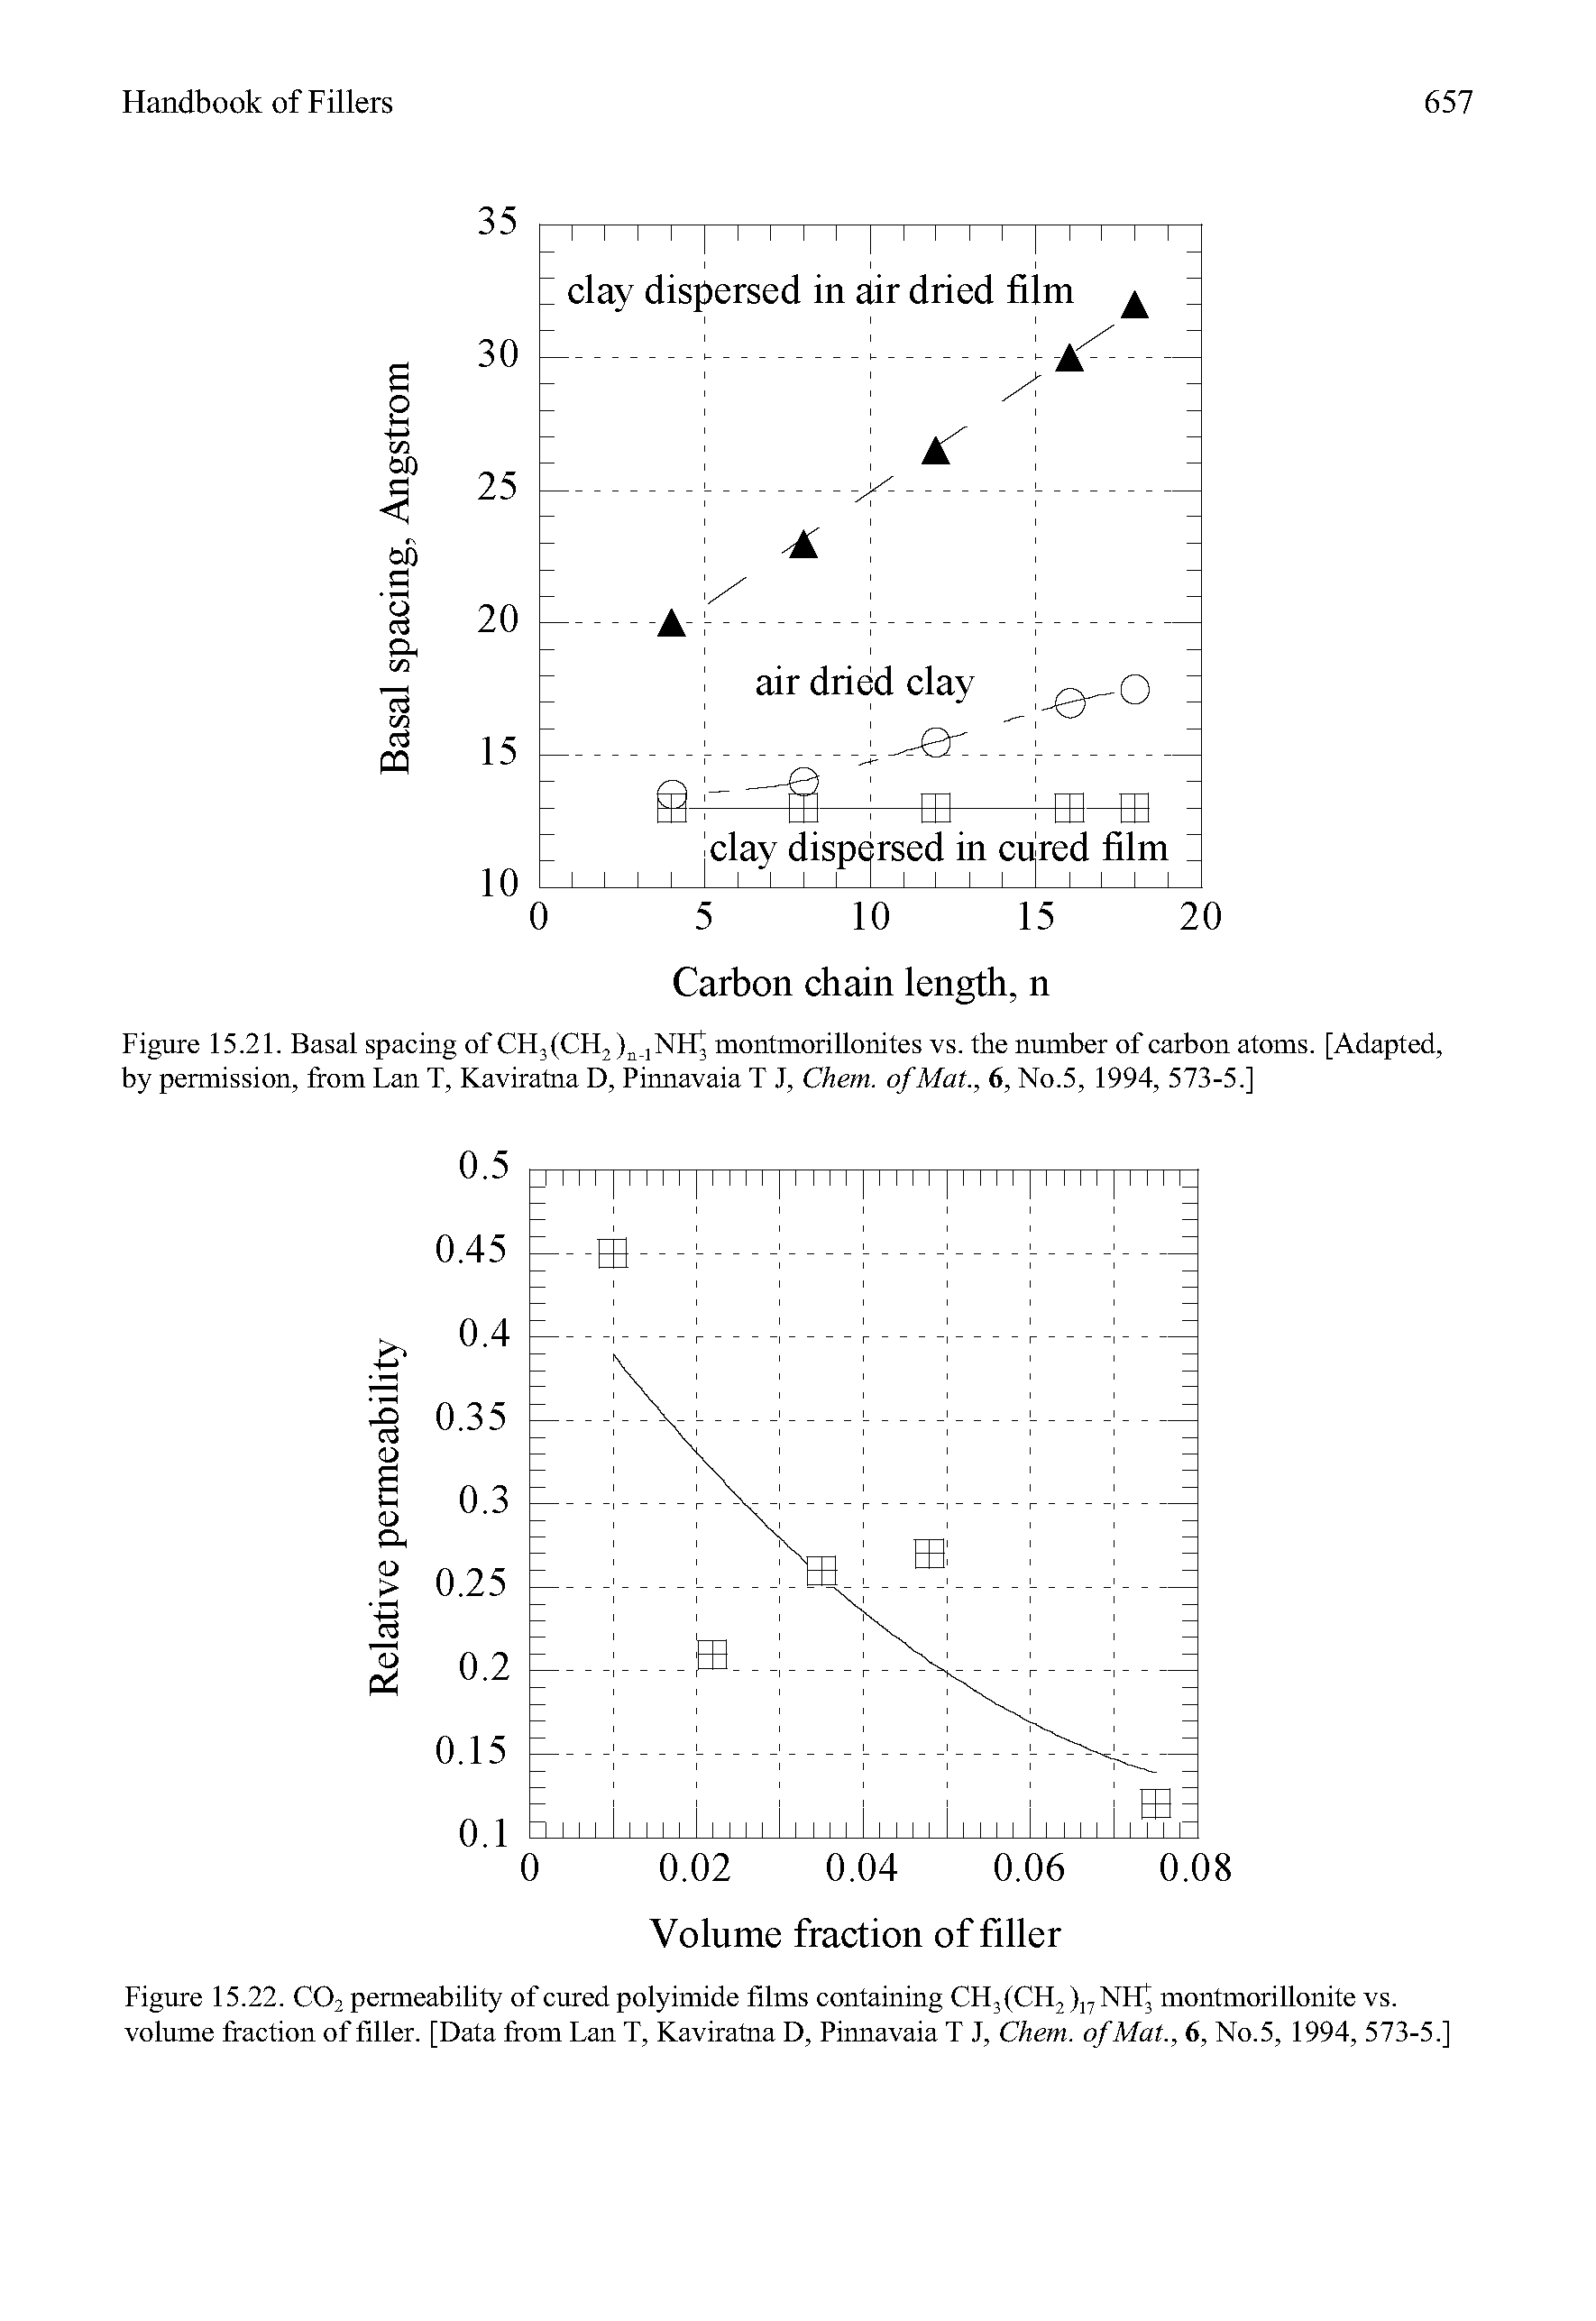 Figure 15.21. Basal spacing of CH3(CH2)ii iNH montmorillonites vs. the number of carbon atoms. [Adapted, by permission, from Lan T, Kaviratna D, Pinnavaia T J, Chem. of Mat., 6, No.5, 1994, 573-5.]...